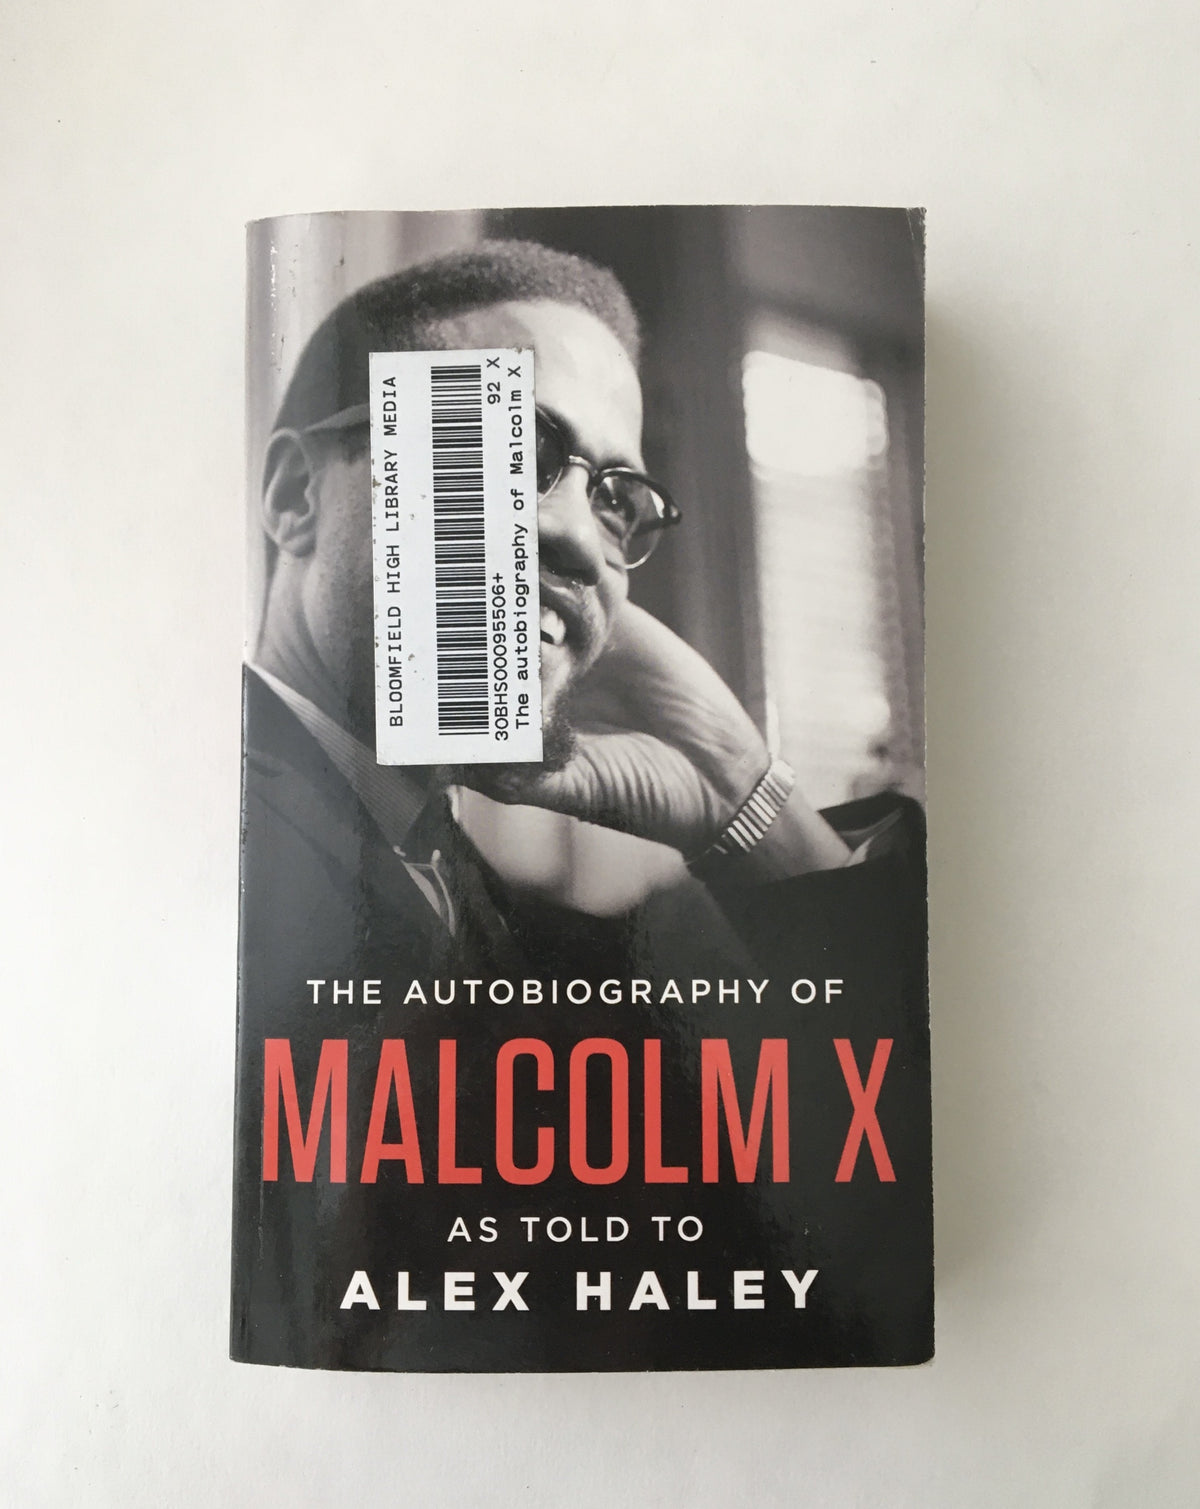 Donate: The Autobiography of Malcolm X co-written with Alex Haley